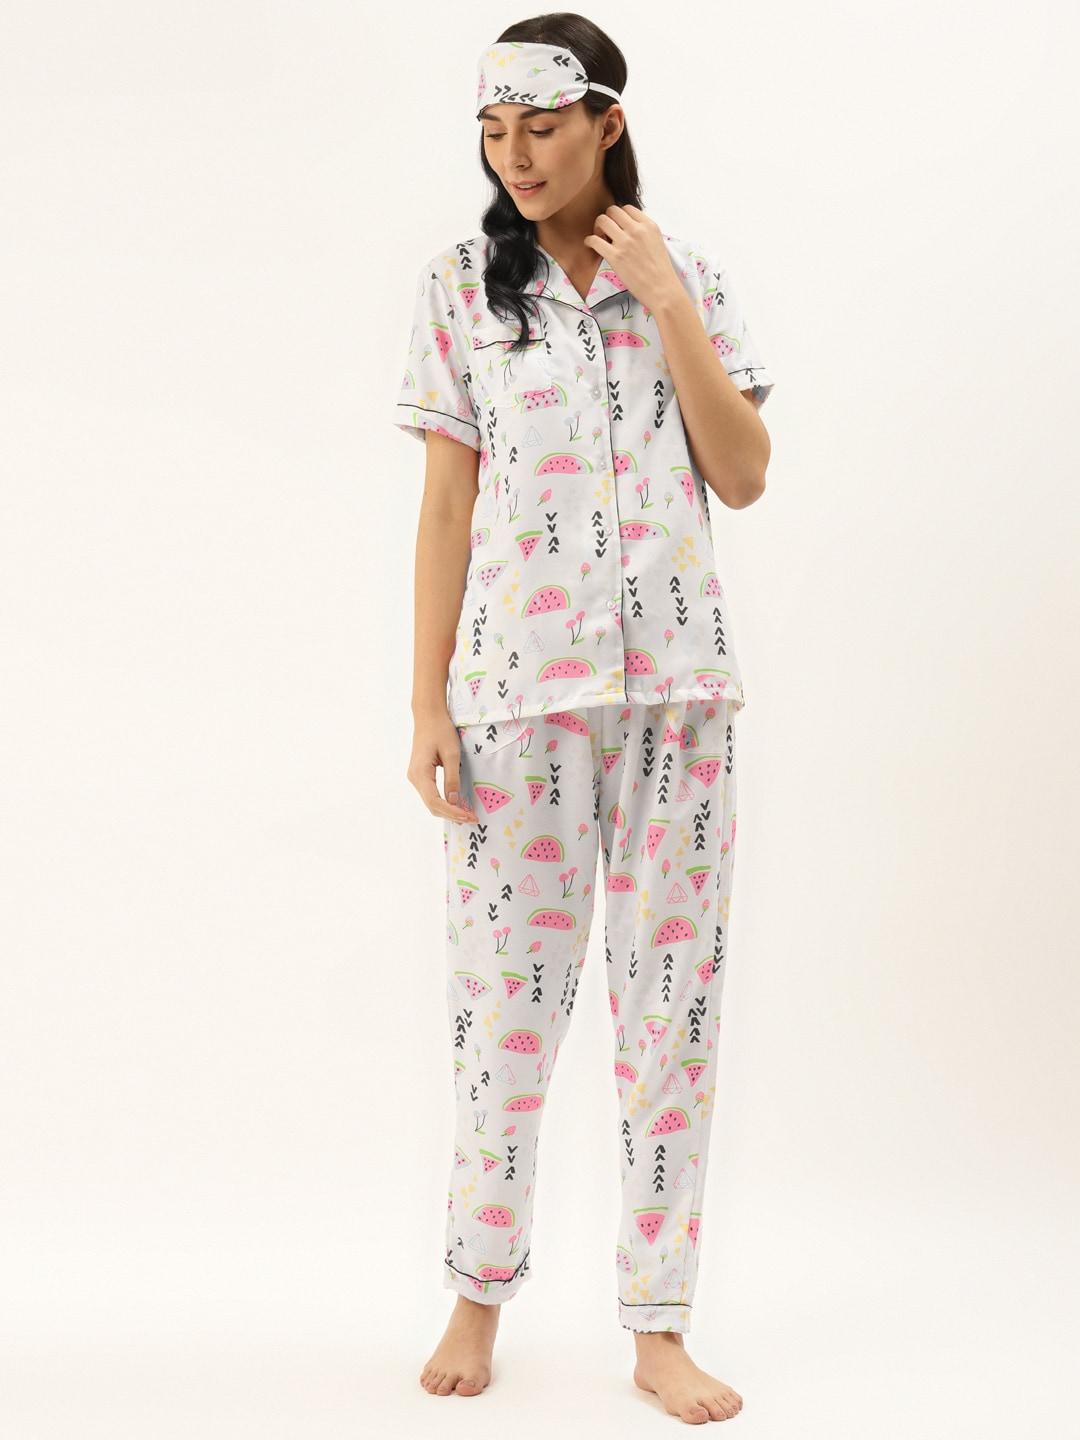 rapra-the-label-women-white-&-pink-pure-cotton-fruit-print-night-suit-with-eye-mask